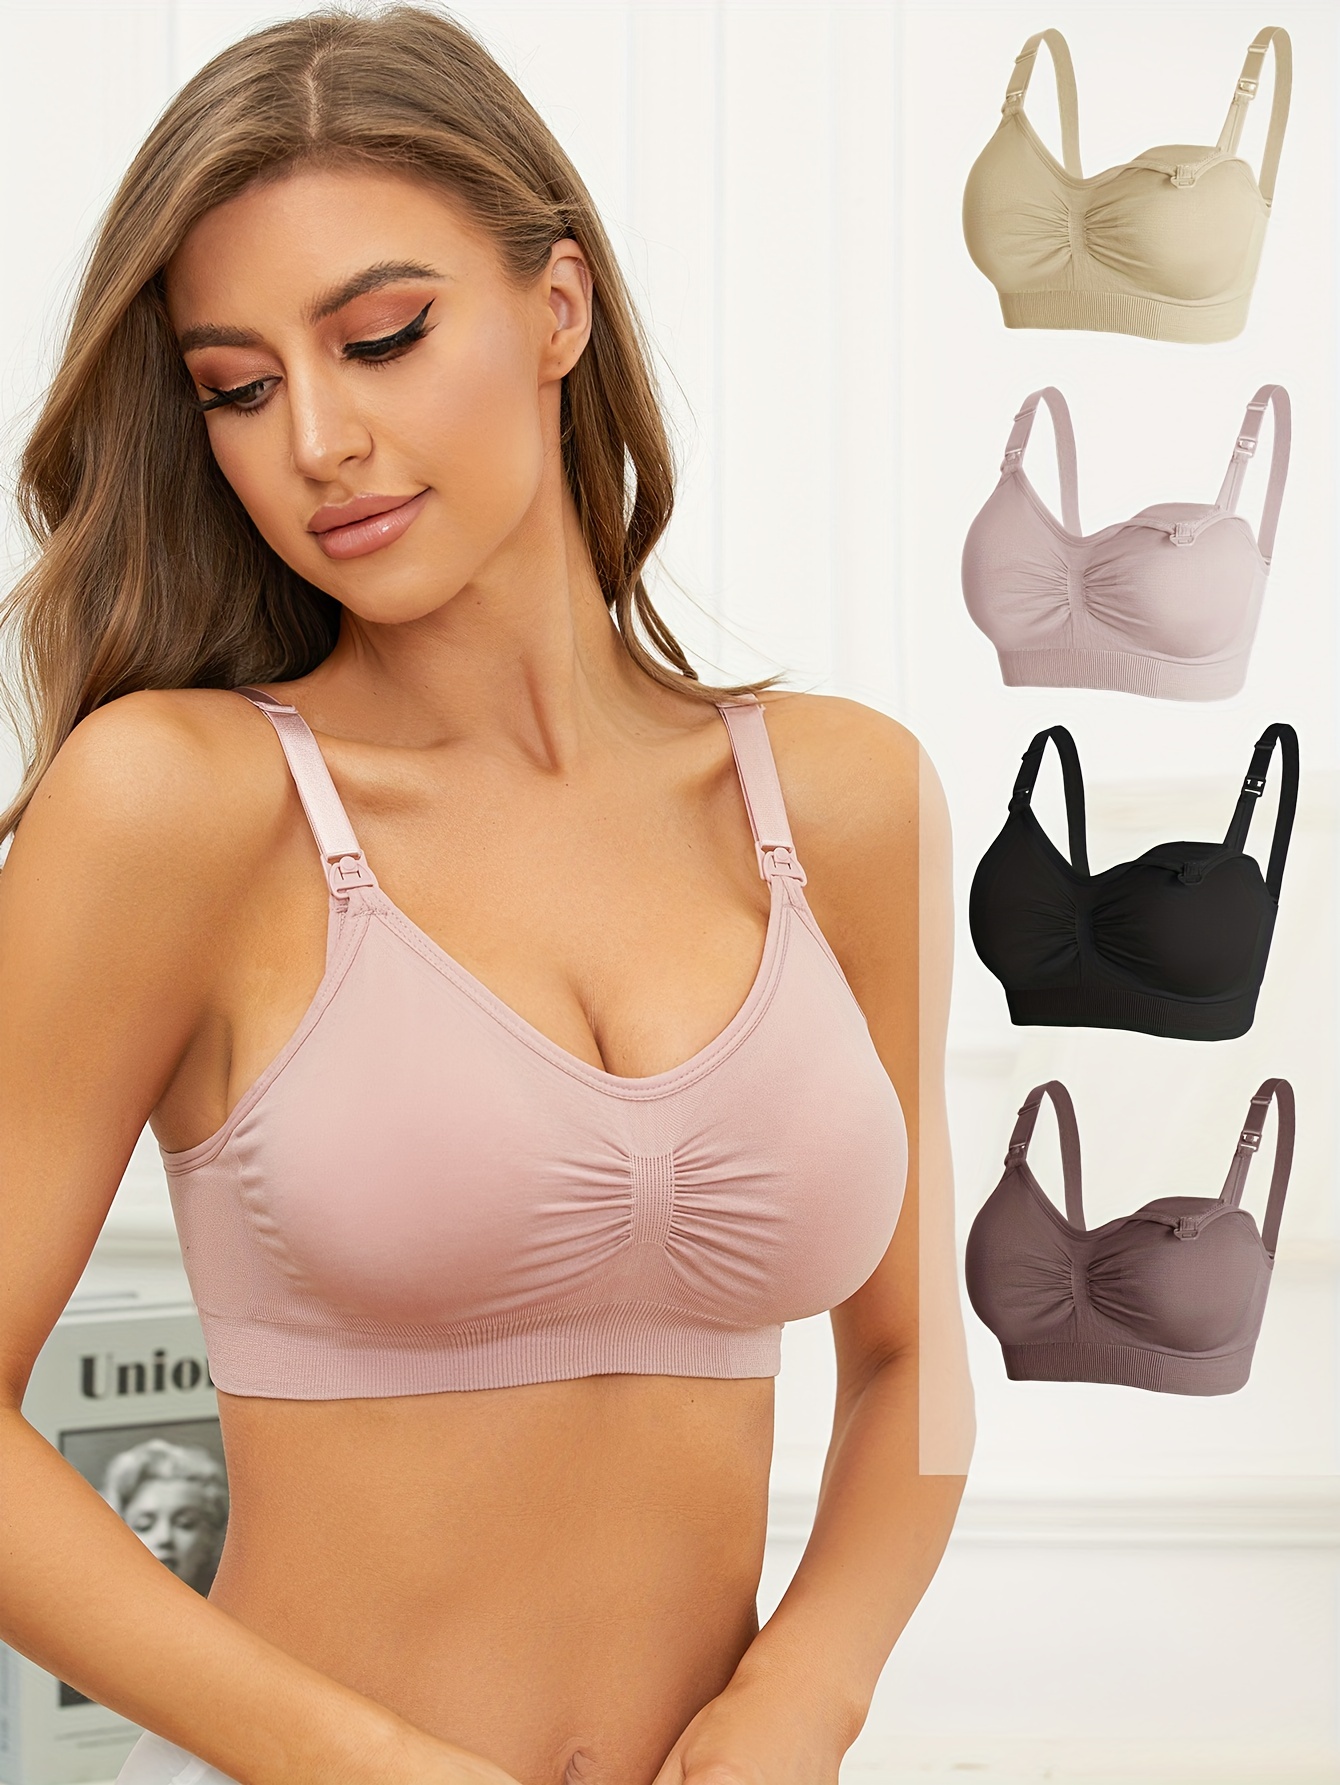 25 Best Maternity Bras That Are Comfy and Supportive